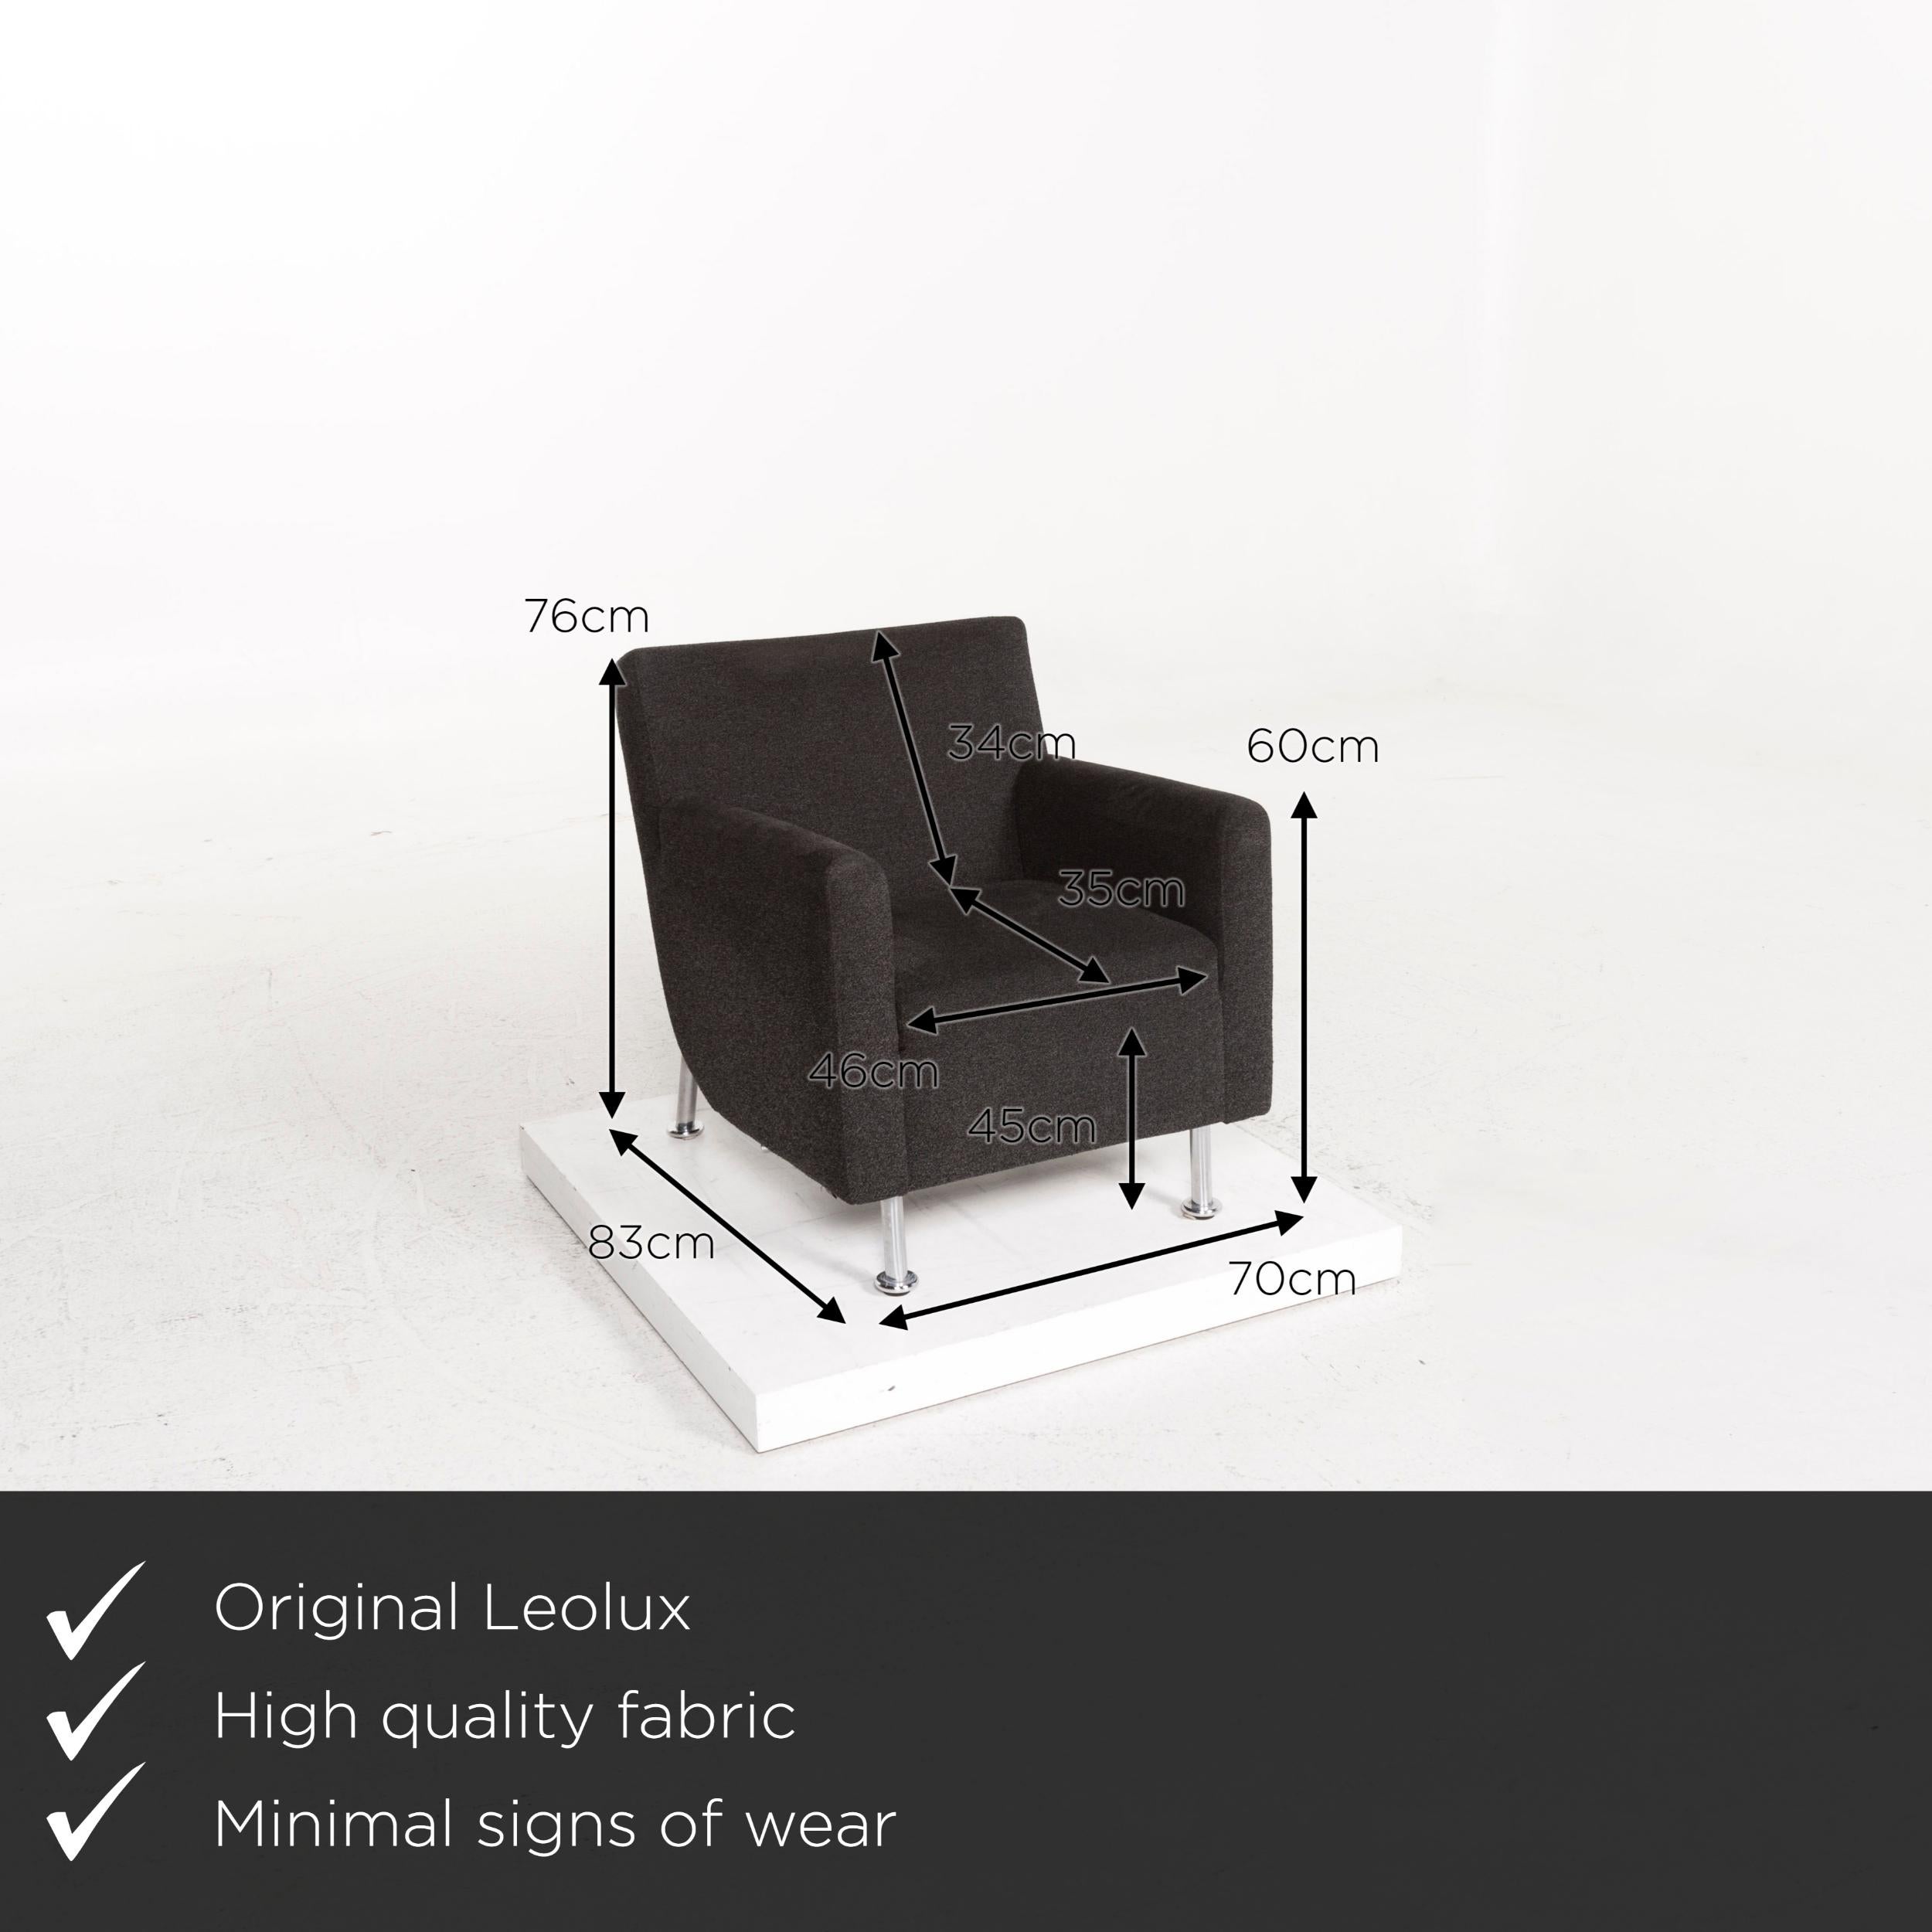 We present to you a Leolux fabric armchair black.
 

 Product measurements in centimeters:
 

Depth 83
Width 70
Height 76
Seat height 45
Rest height 60
Seat depth 35
Seat width 46
Back height 34.

 